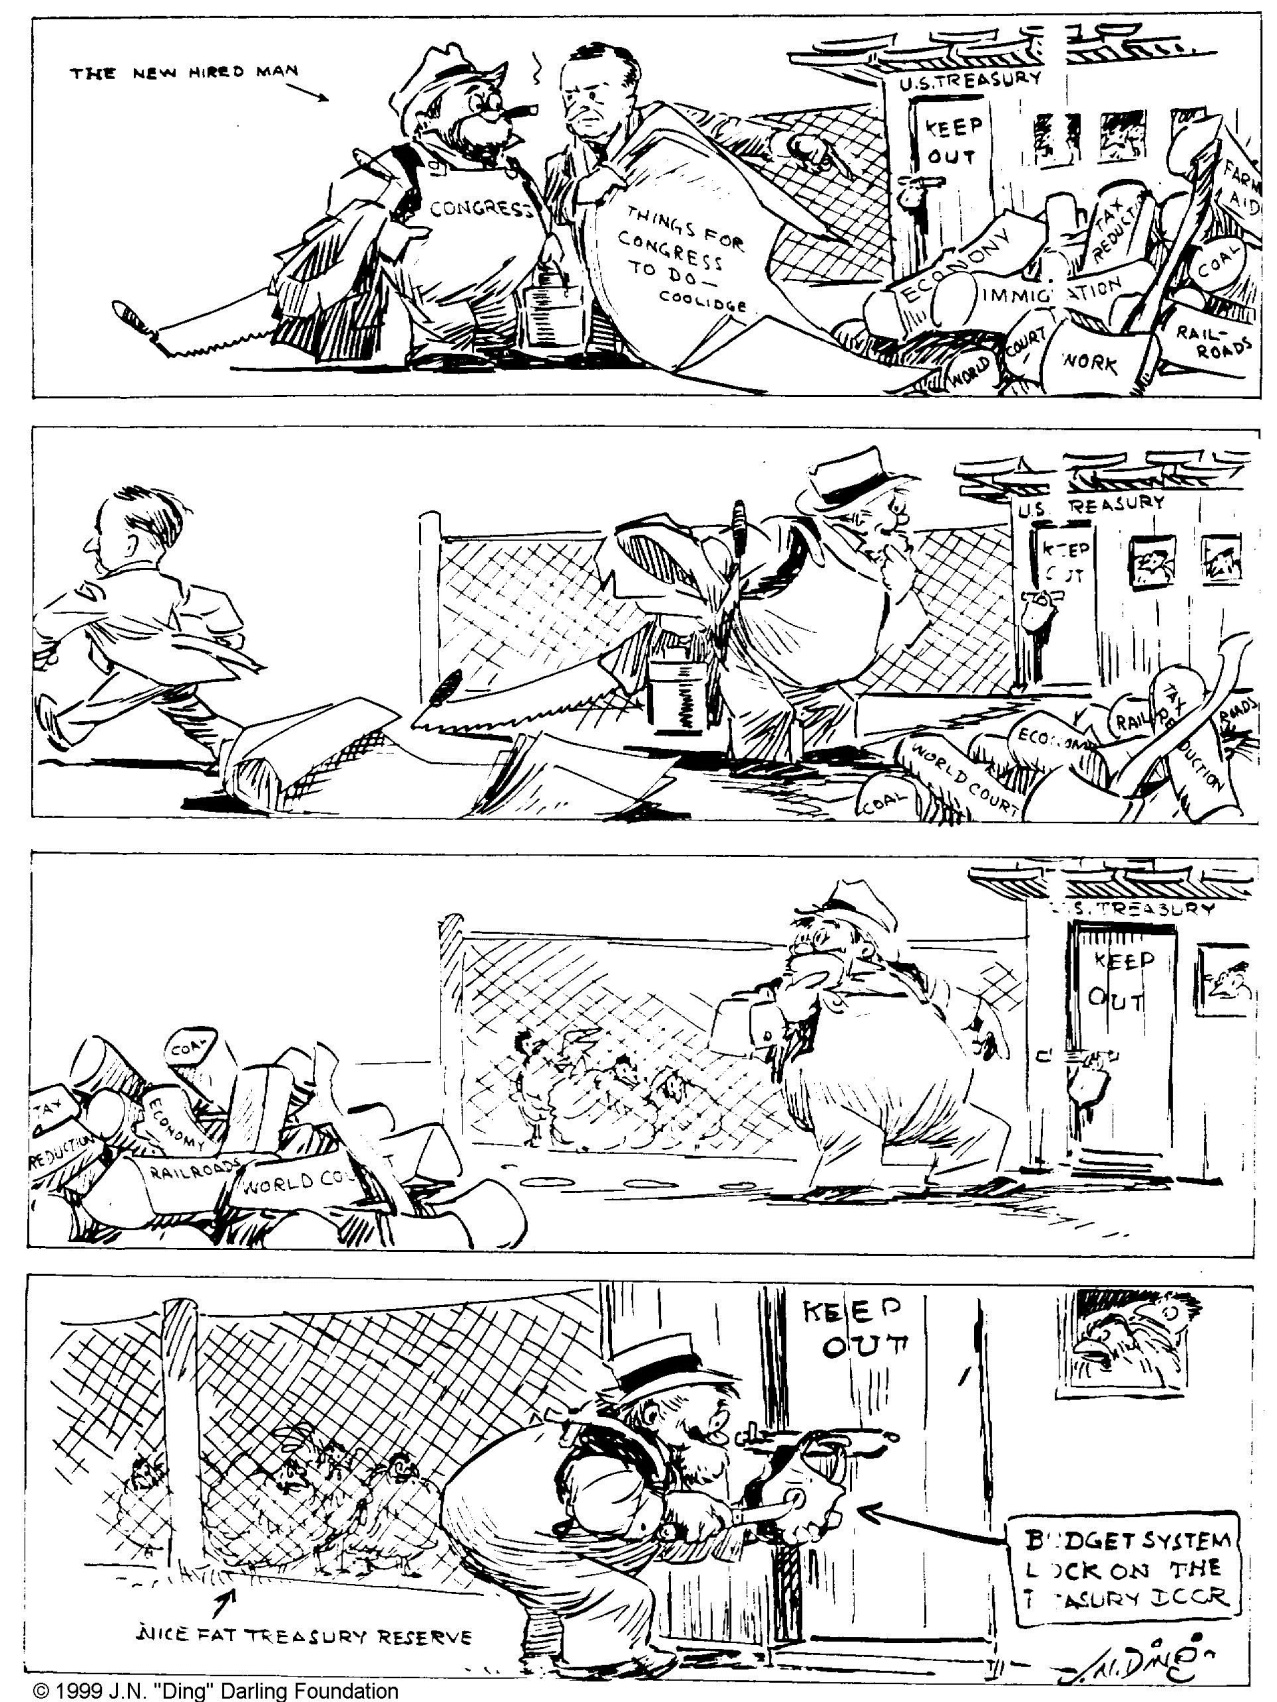 "And the first thing he tackled was the lock on the chicken coop," by "Ding" Darling, The Des Moines Register, December 11, 1923. Courtesy of the Darling Foundation and the University of Iowa. 